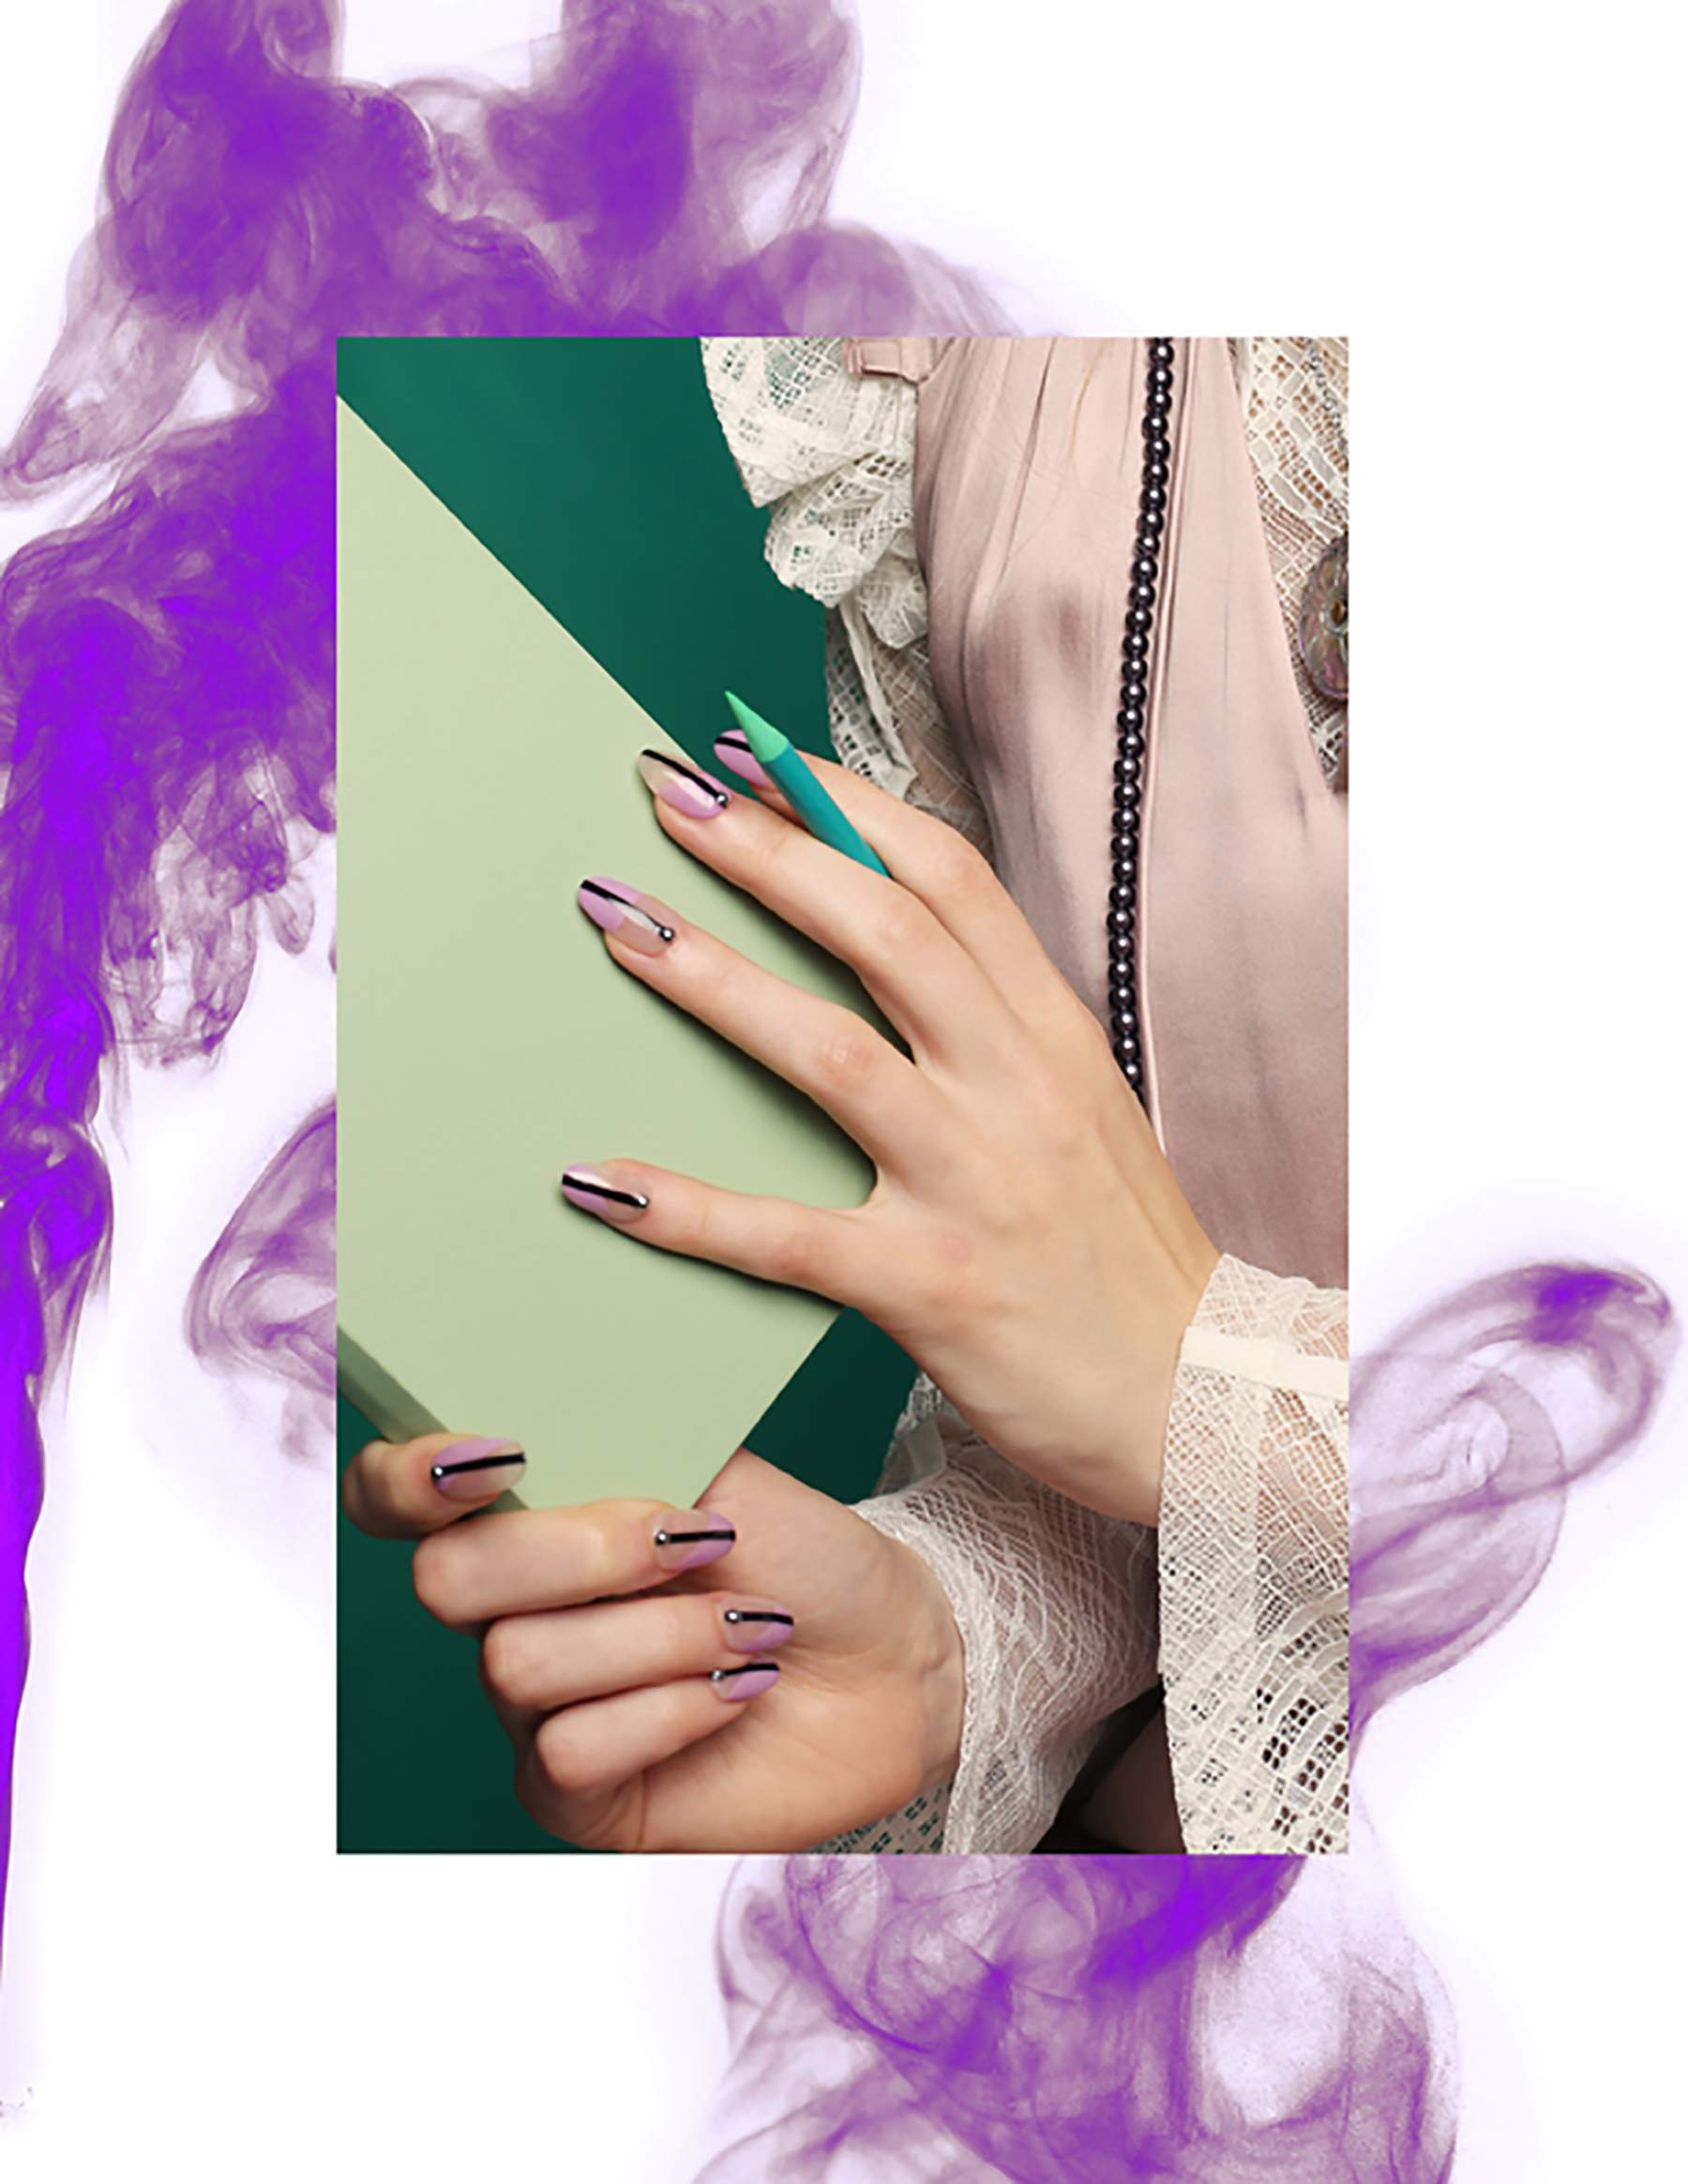 Close up of green and black manicured nails on a hand that holds a olive green book and pencil, image is layered ontop of purple smoke image